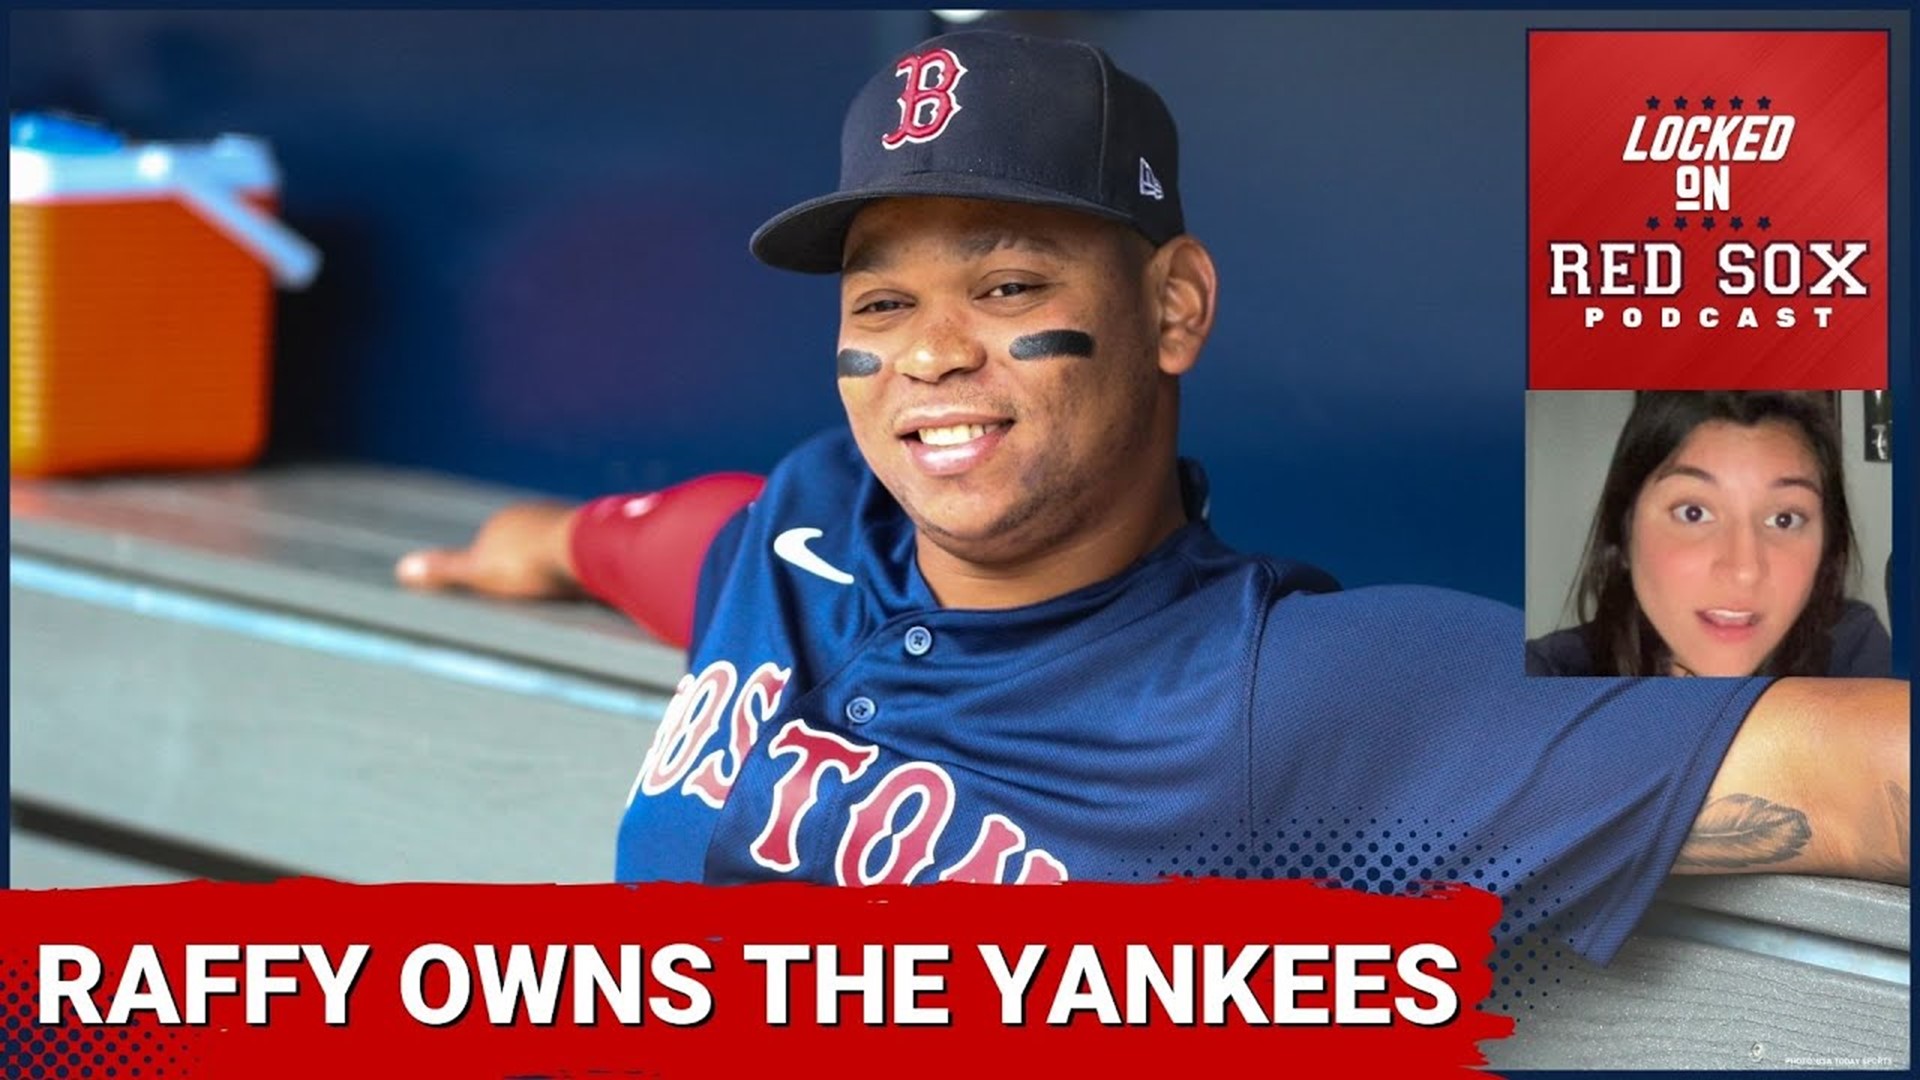 Rafael Devers still owns the Yankees as Boston Red Sox grab series sweep, Locked On Red Sox